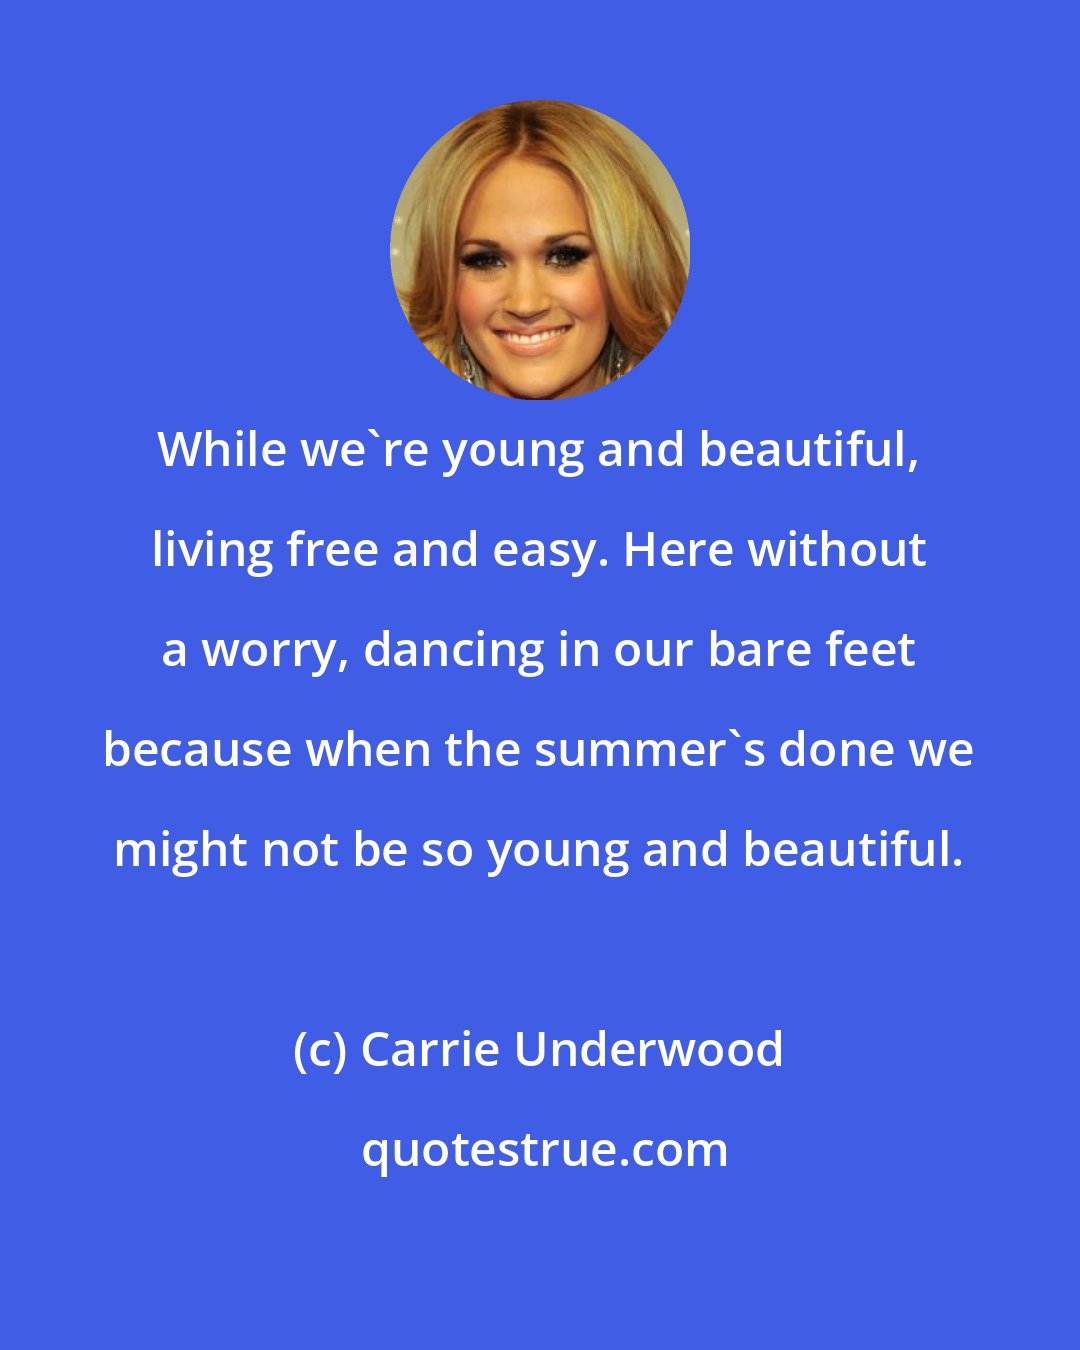 Carrie Underwood: While we're young and beautiful, living free and easy. Here without a worry, dancing in our bare feet because when the summer's done we might not be so young and beautiful.